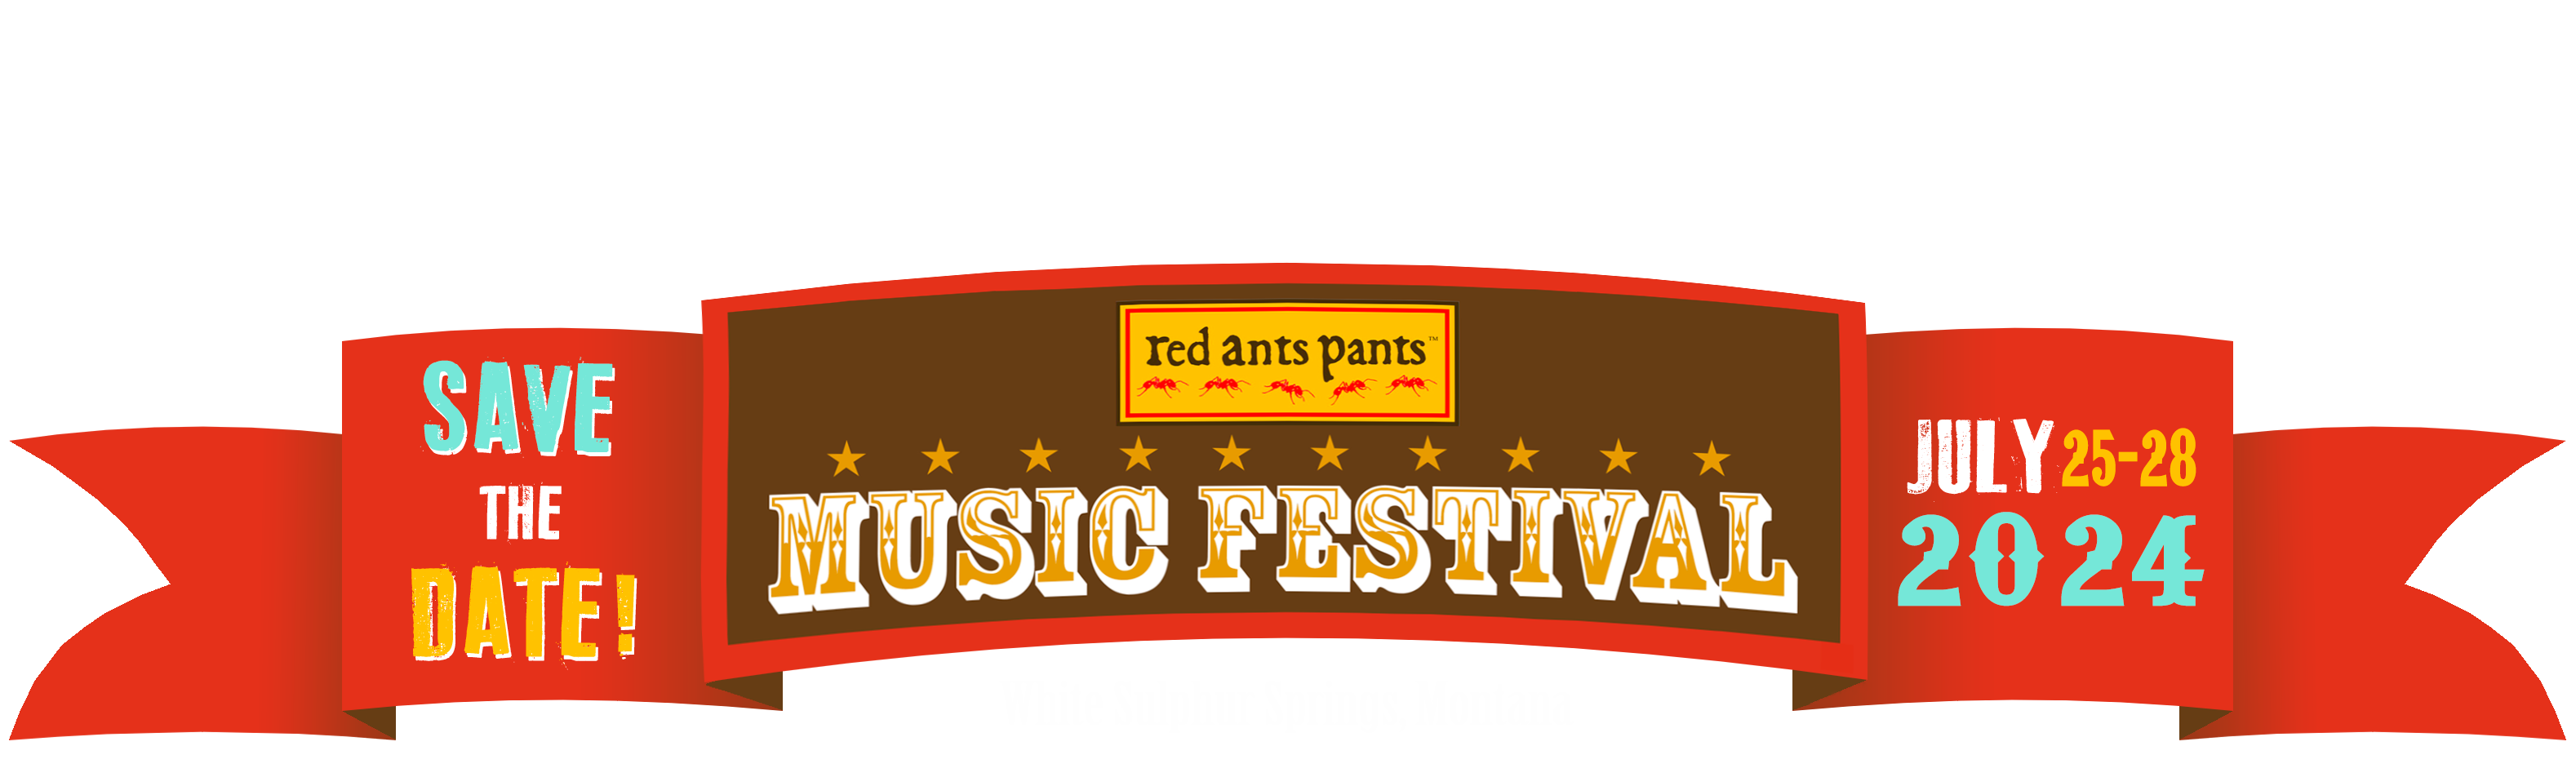 2024 Main Stage Lineup Red Ants Pants Music Festival White Sulphur